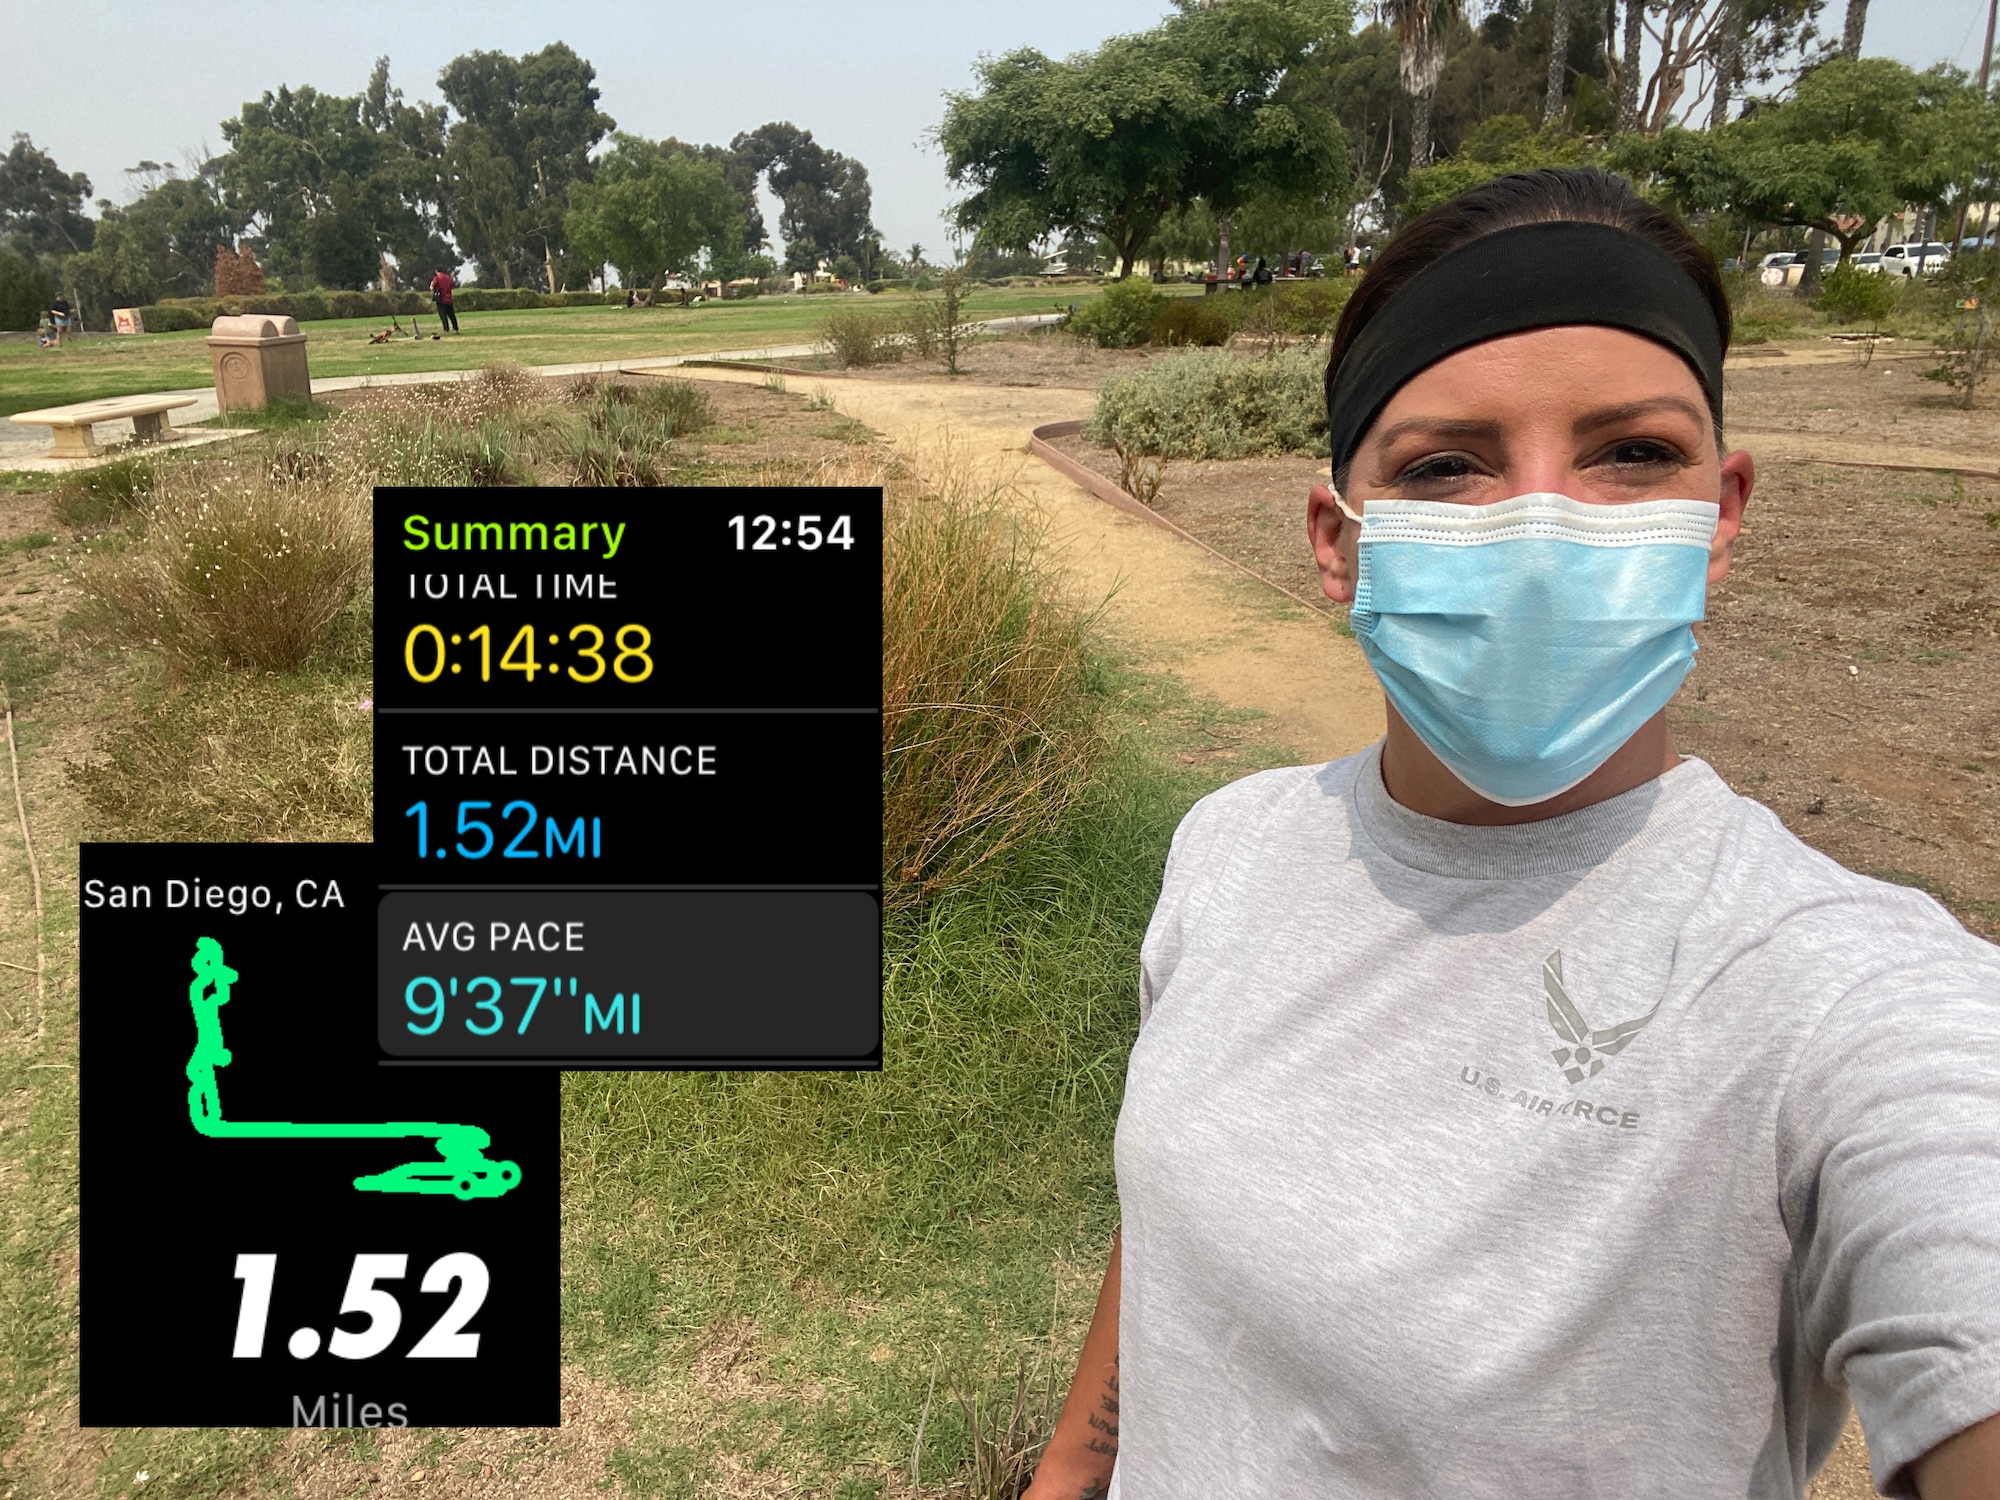 Master Sgt. Jaime Ciciora, 452nd Air Mobility Wing Public Affairs superintendent, takes a selfie to document a virtual mock fitness assessment at her local park in San Diego, Ca. Ciciora documents her time with a screengrab from a fitness tracker on Sept. 13, 2020.